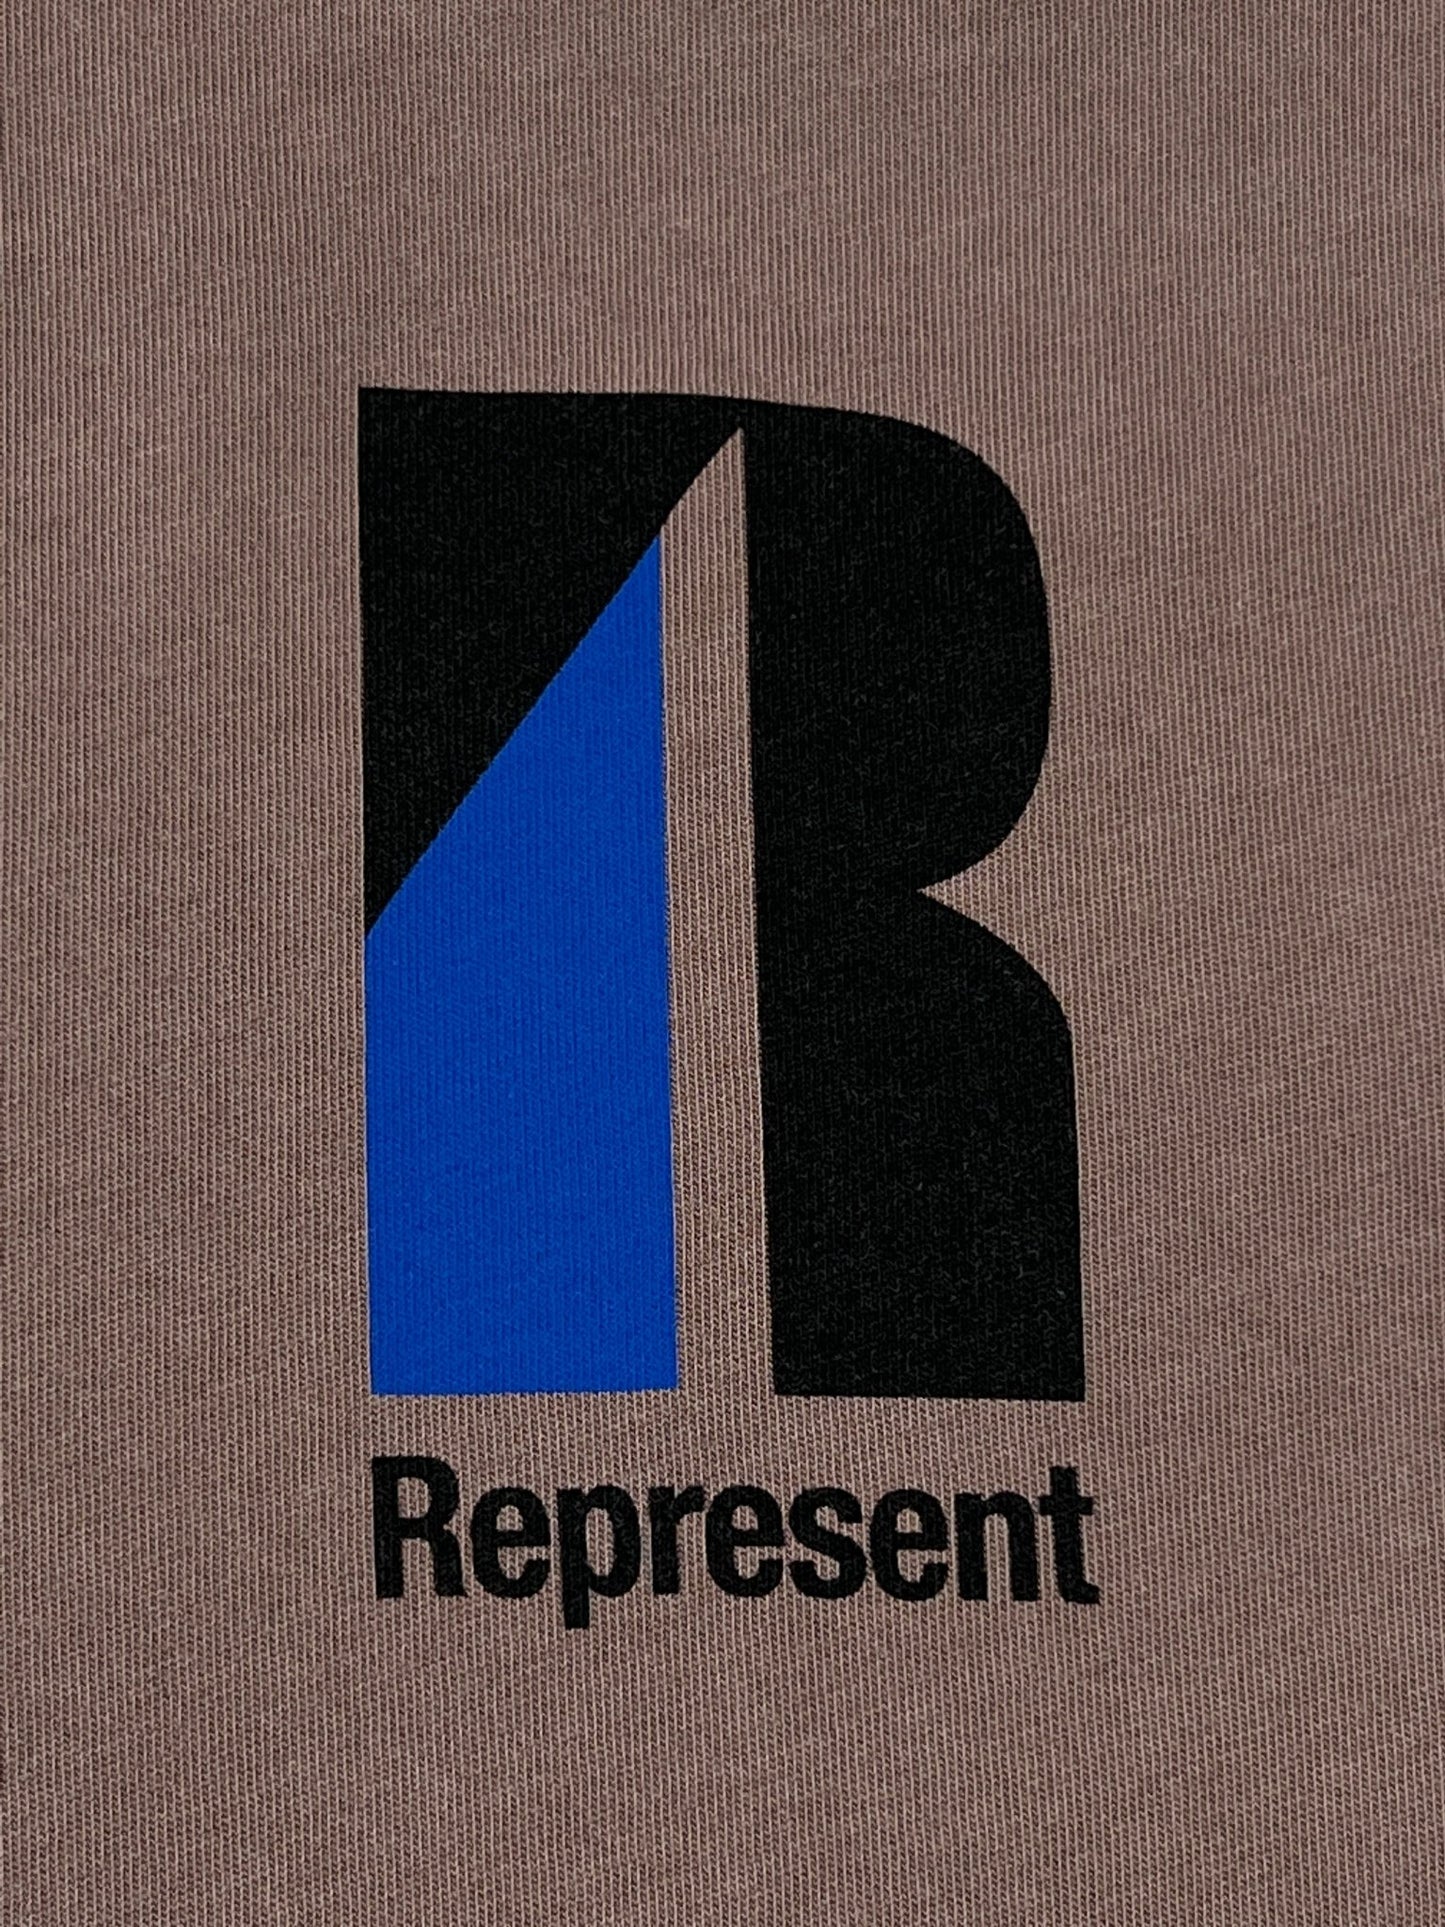 A brown graphic t-shirt with the word "represent" on it.